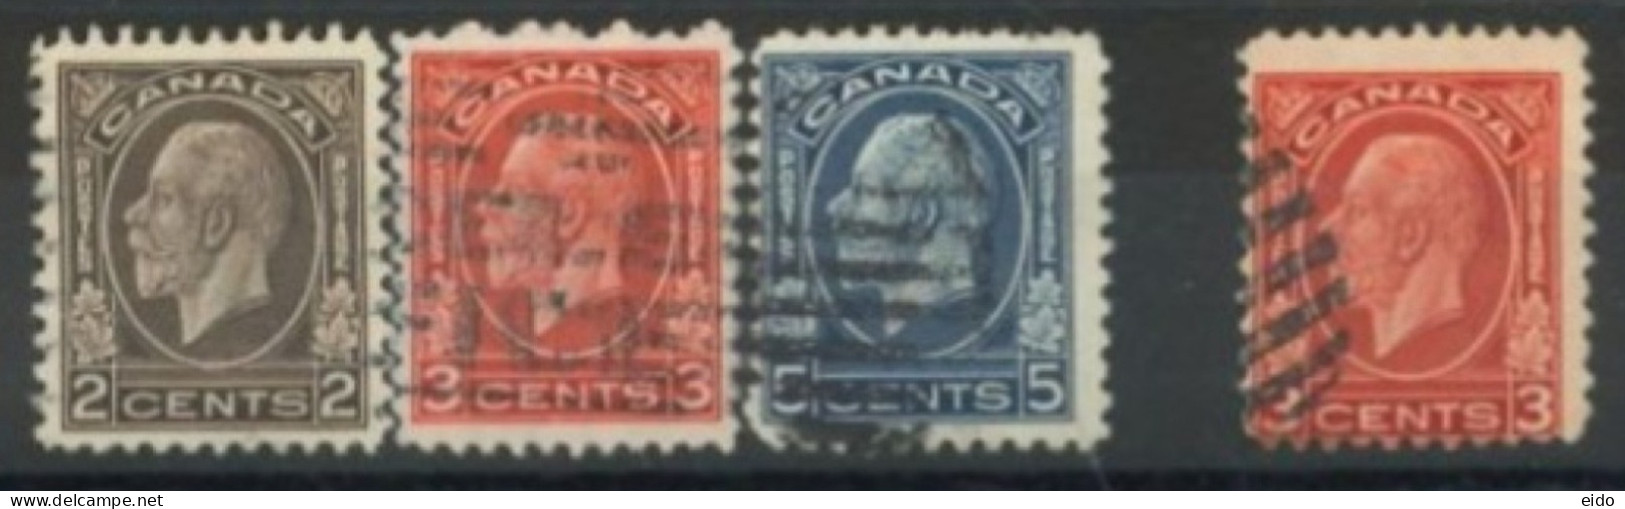 CANADA - 1932, KING GEORGE V STAMPS SET OF 4, USED. - Used Stamps